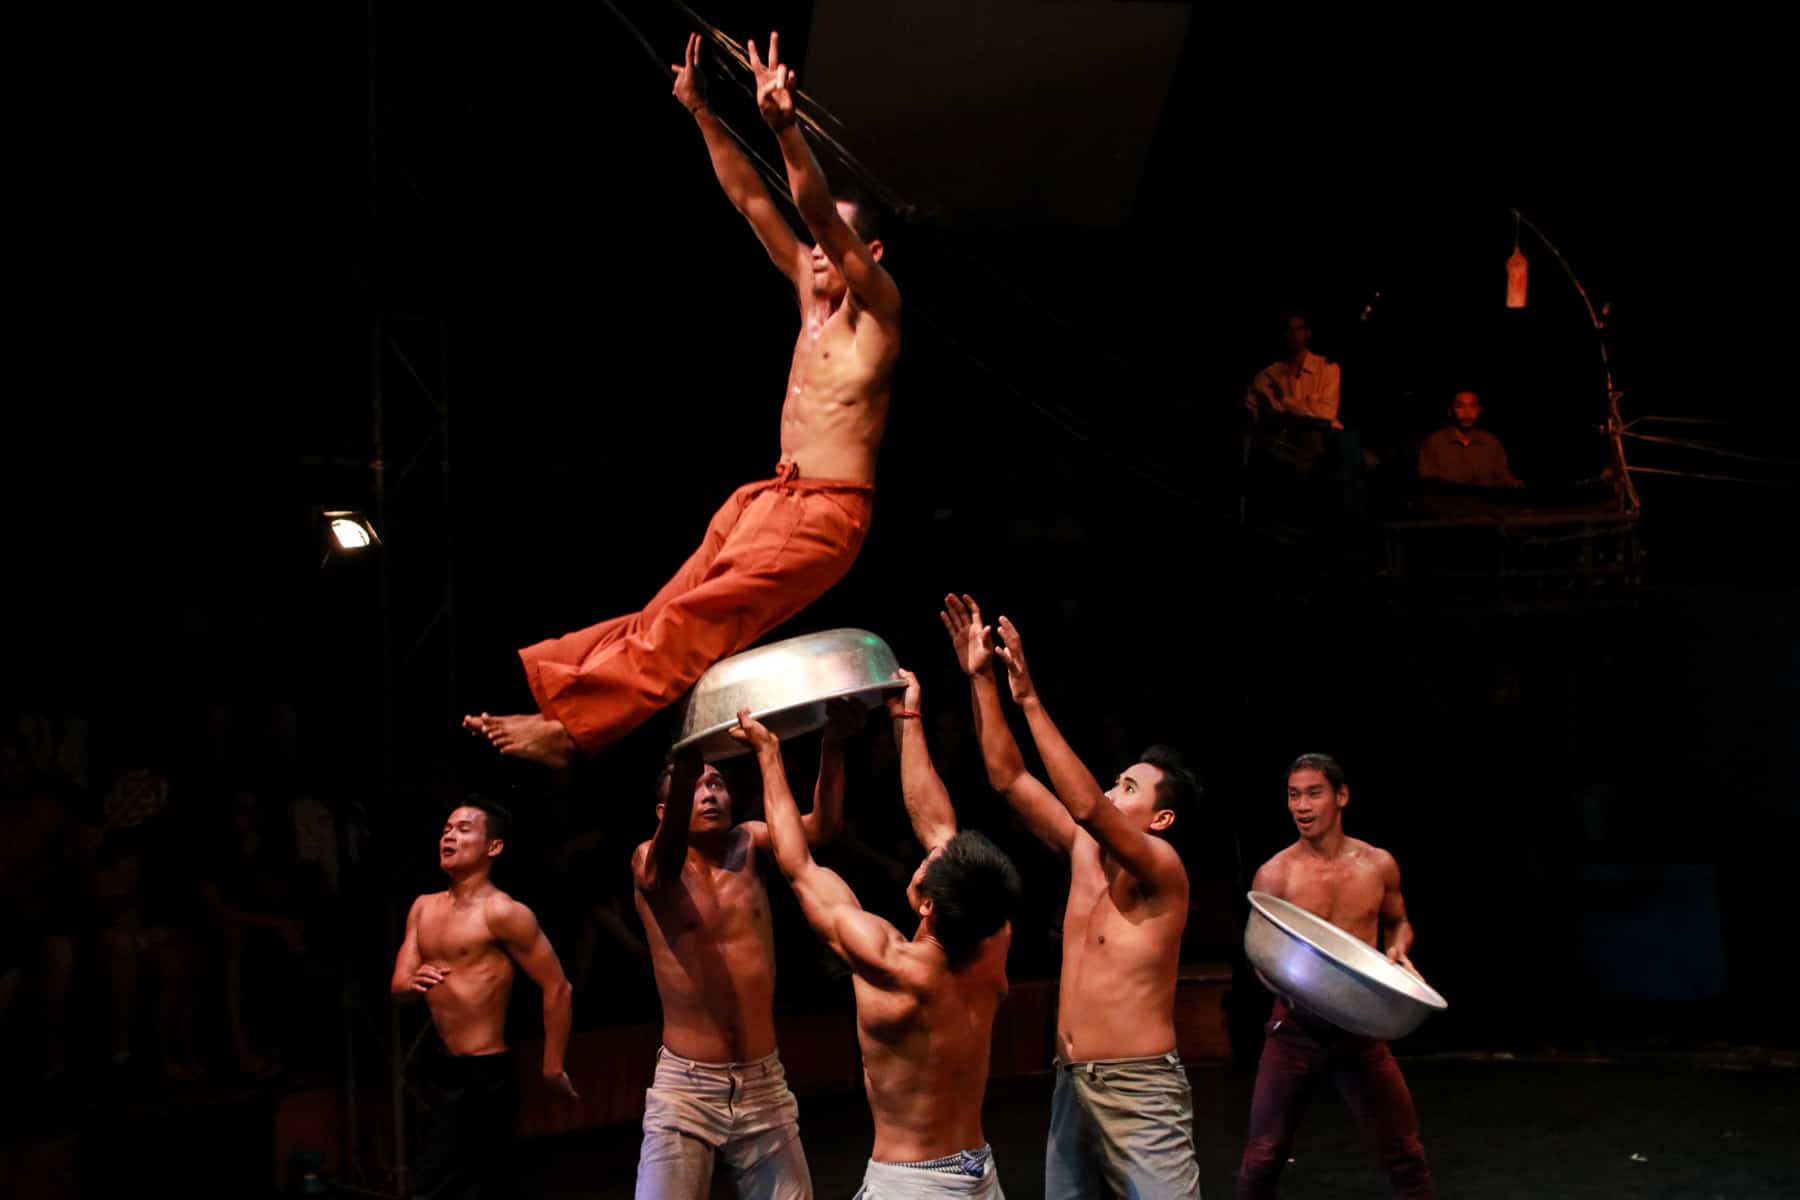 Three men hoist another into the air using a metal bowl during a circus performance in Cambodia. Two other men can be seen in the background, another holding a large silver bowl.